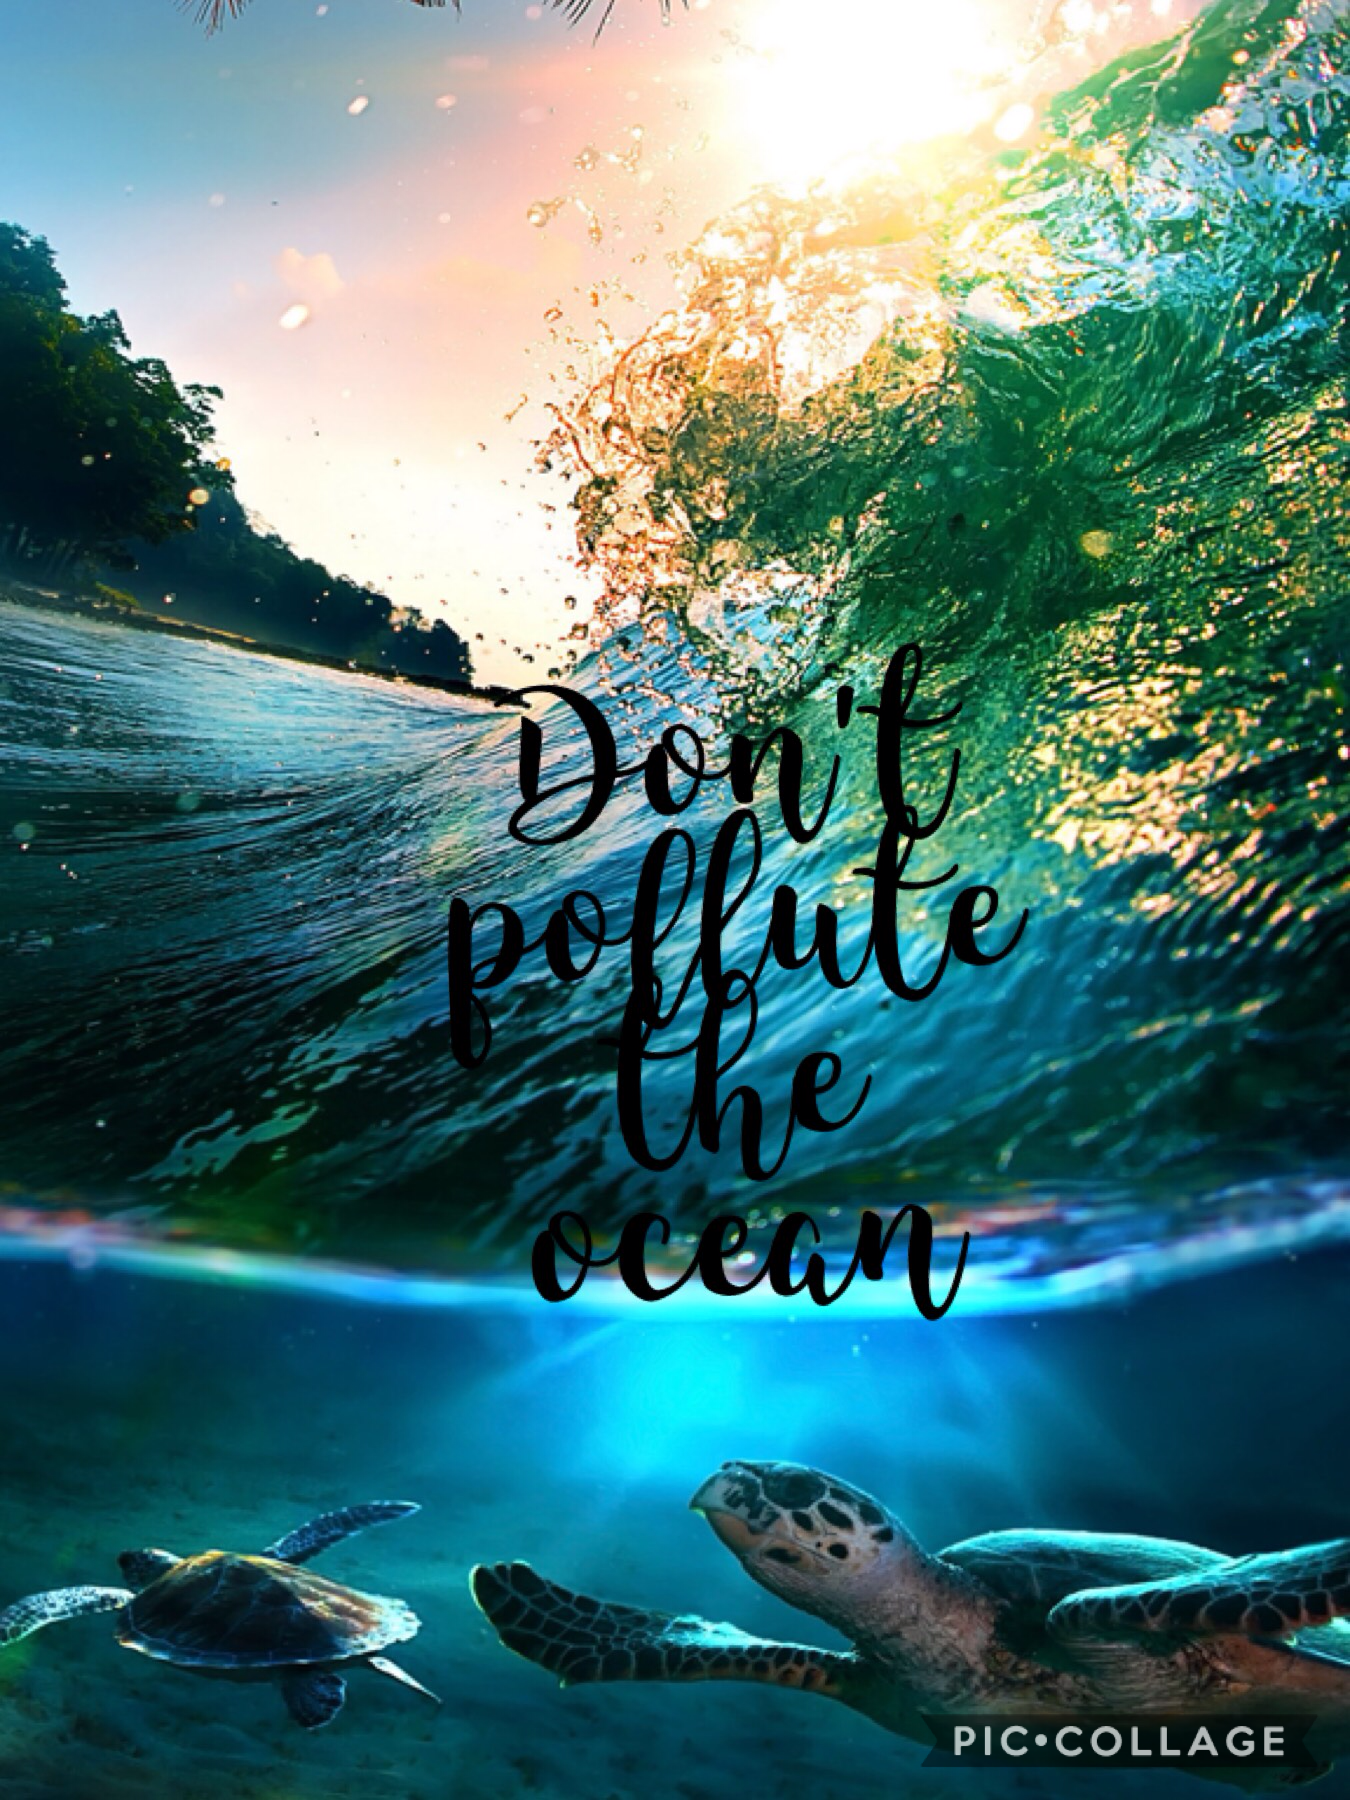 Quotes " Don't pollute the ocean "